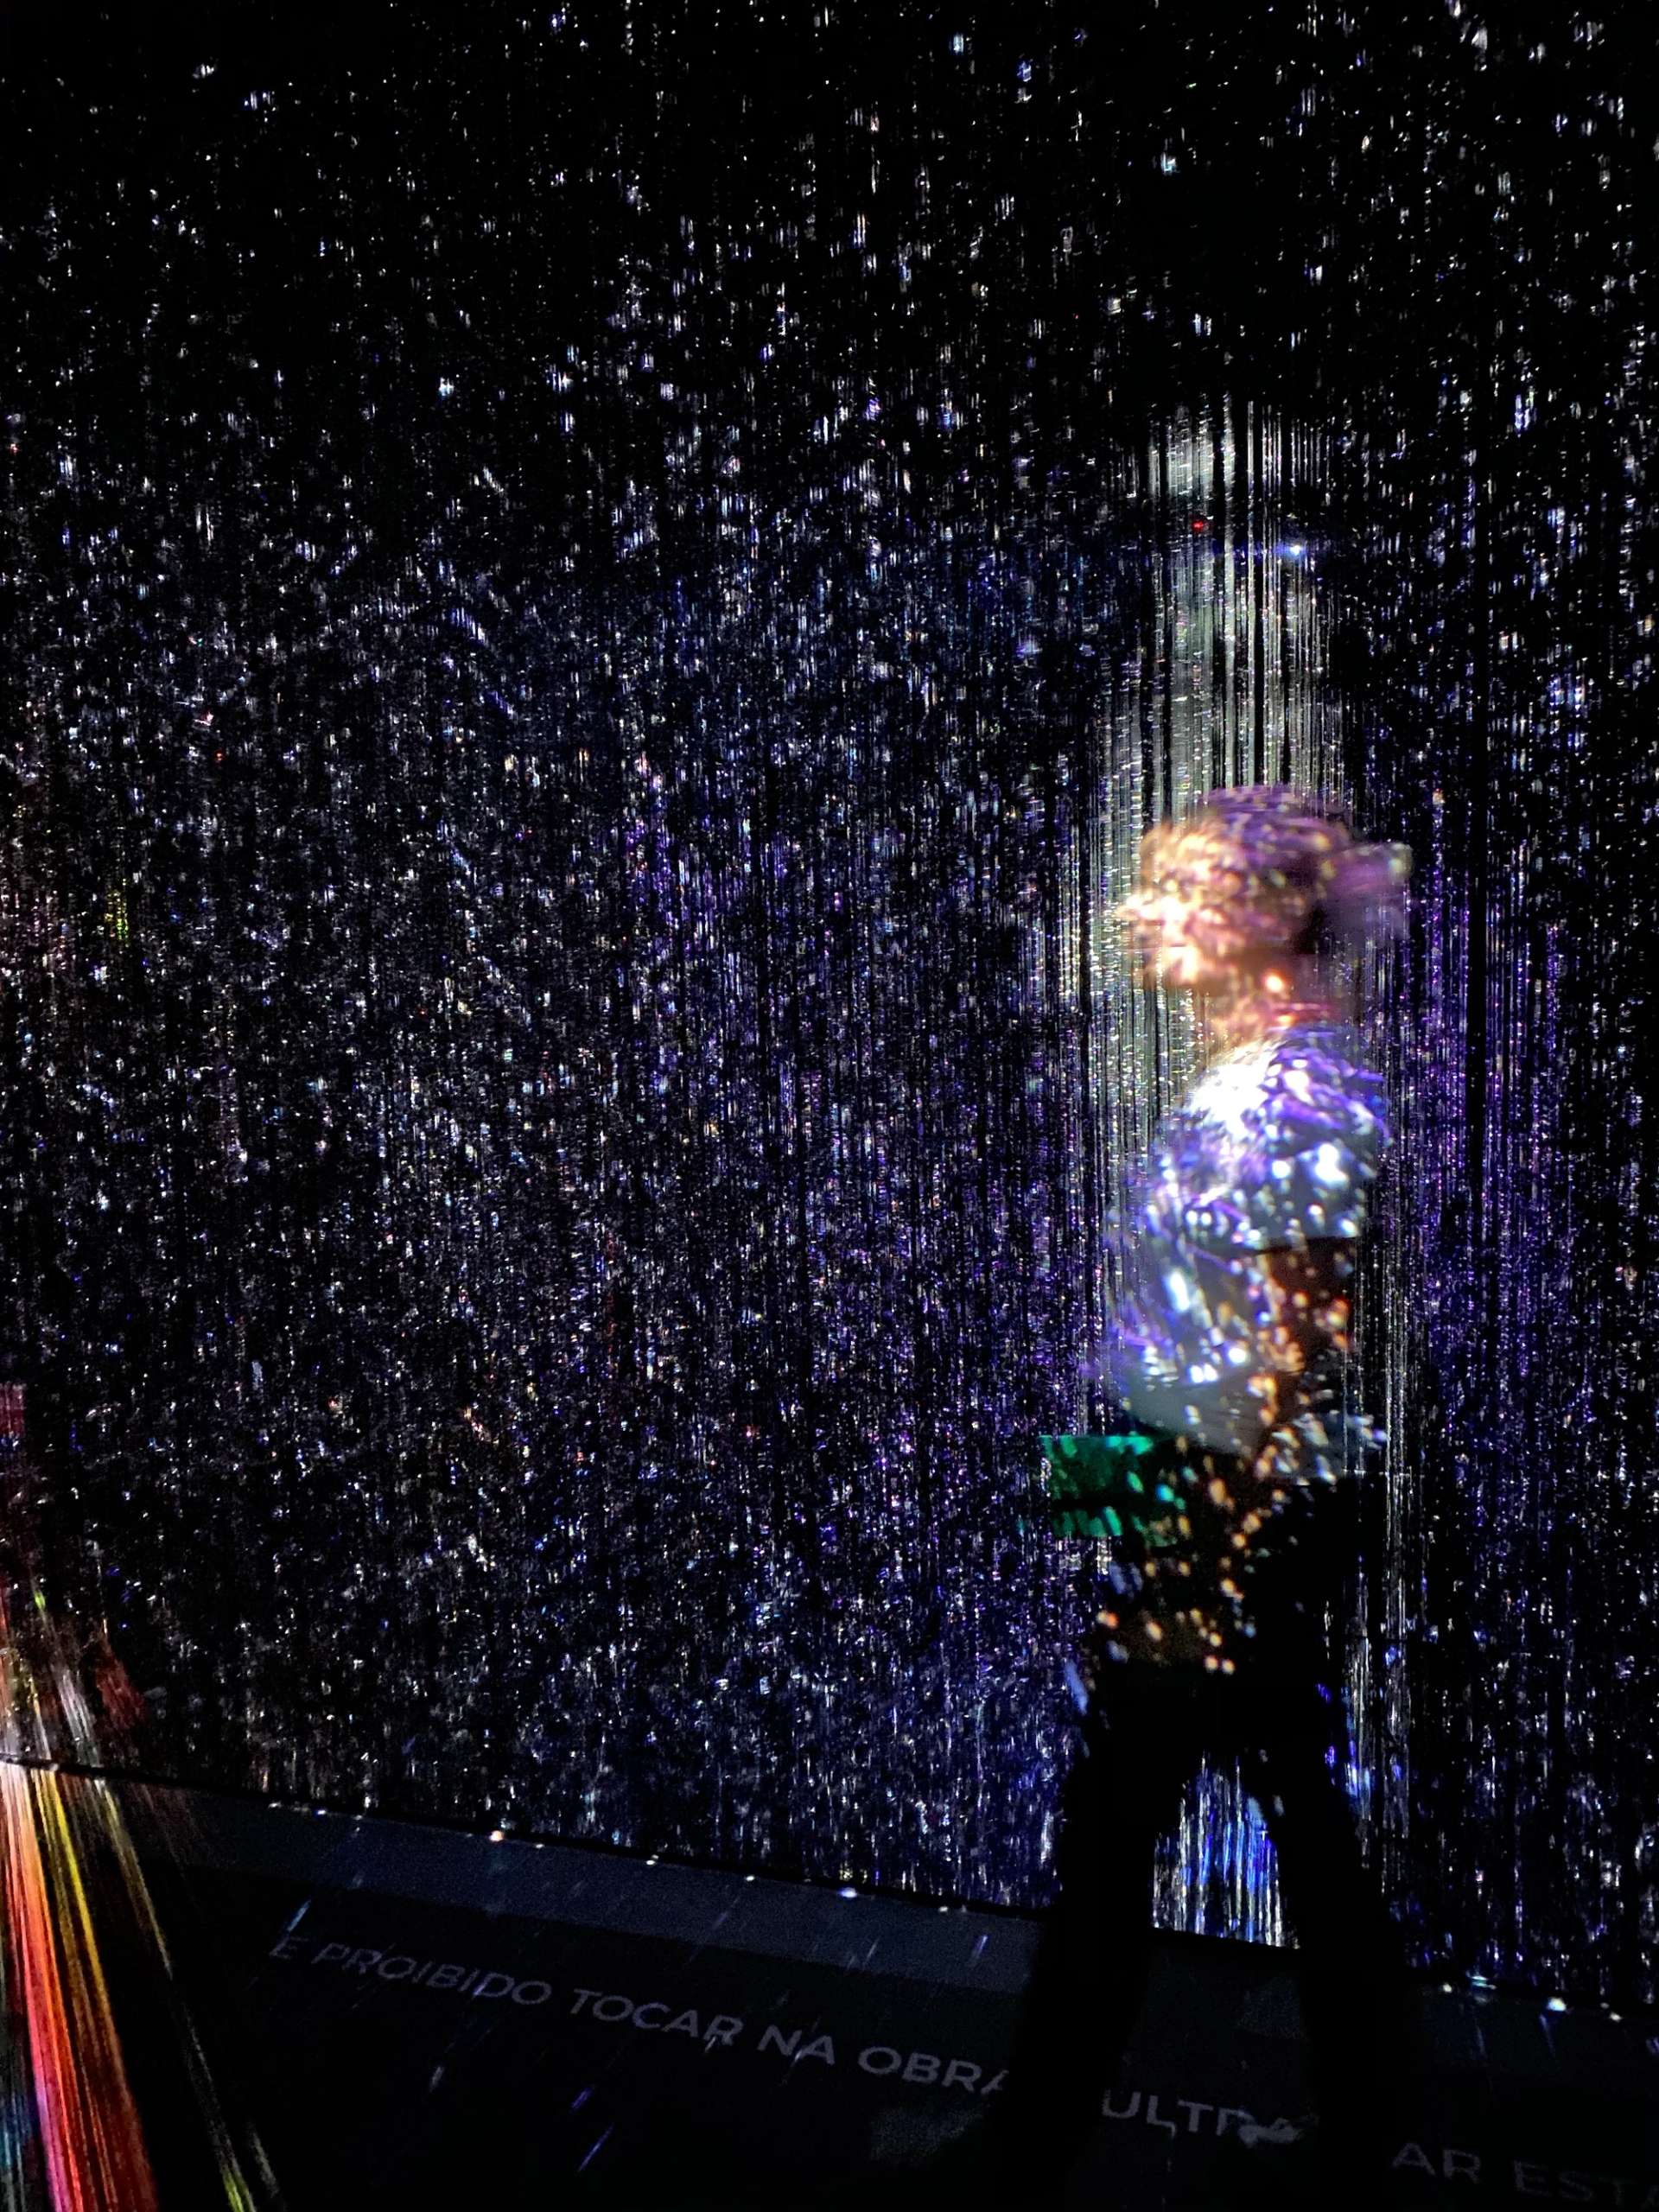 A woman is seen blurry through various streams of light, in this photograph of a viewer interacting with a work by Maja Petric